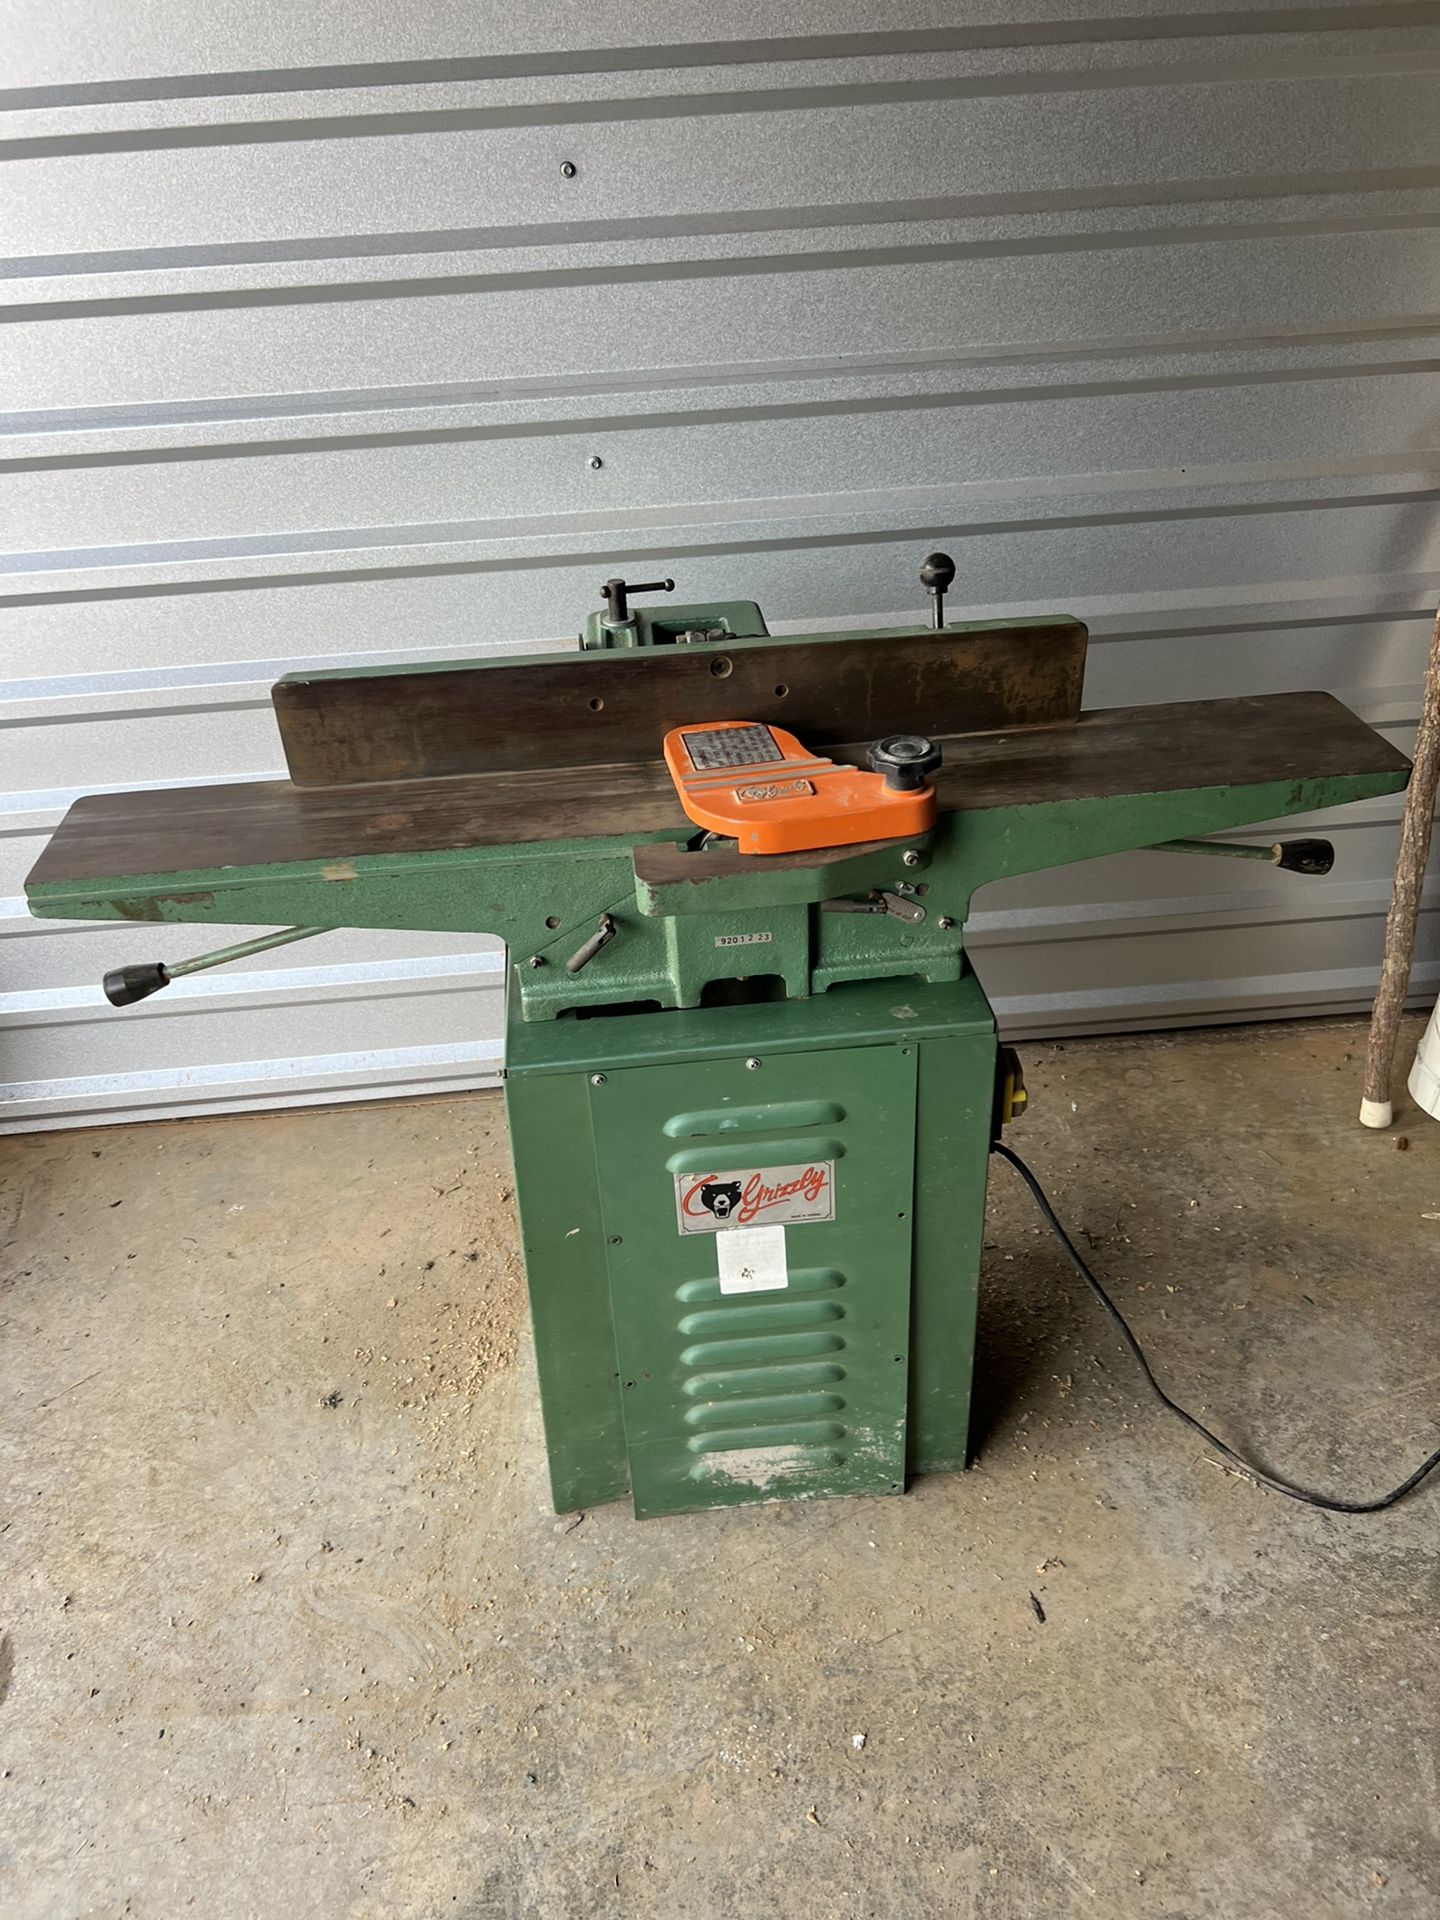 Grizzly 6” Jointer